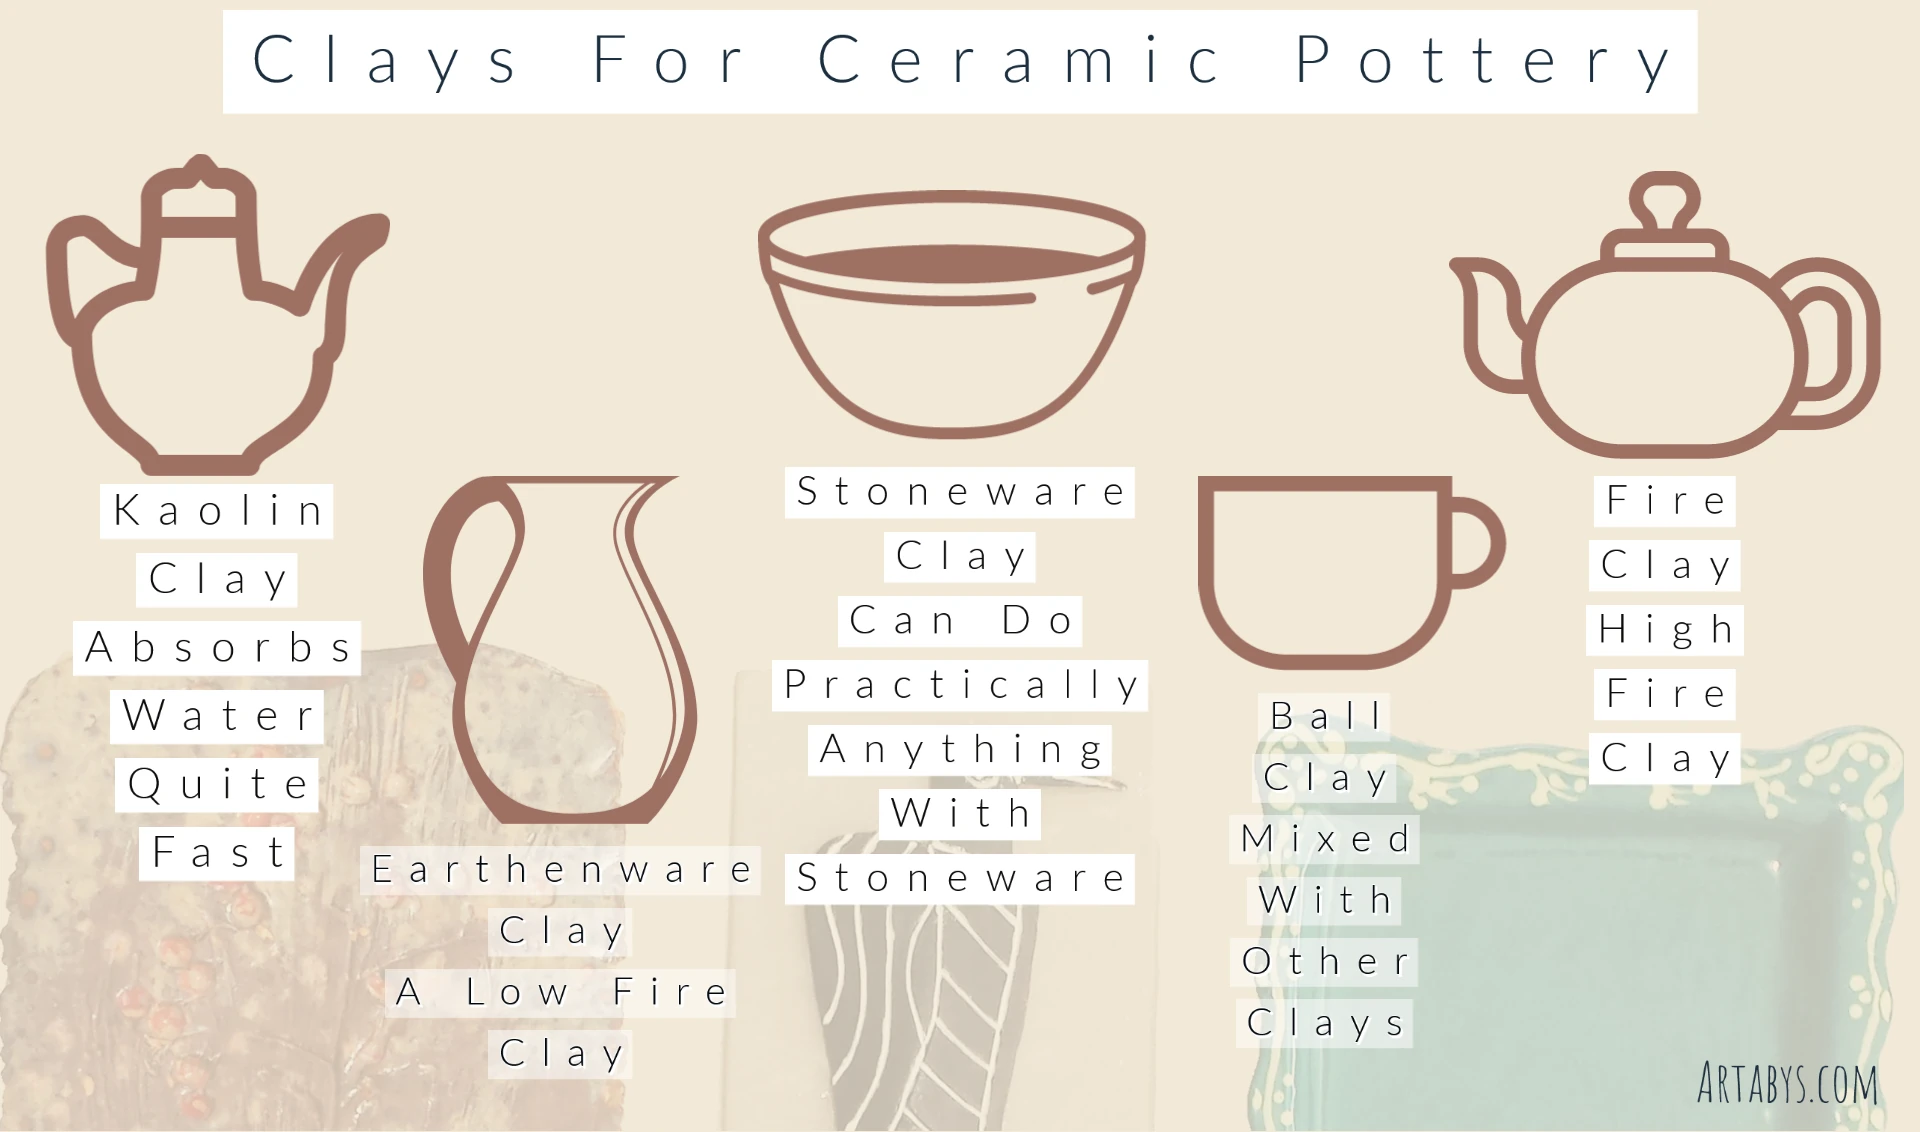 What Clay Do You Need for Ceramic Pottery